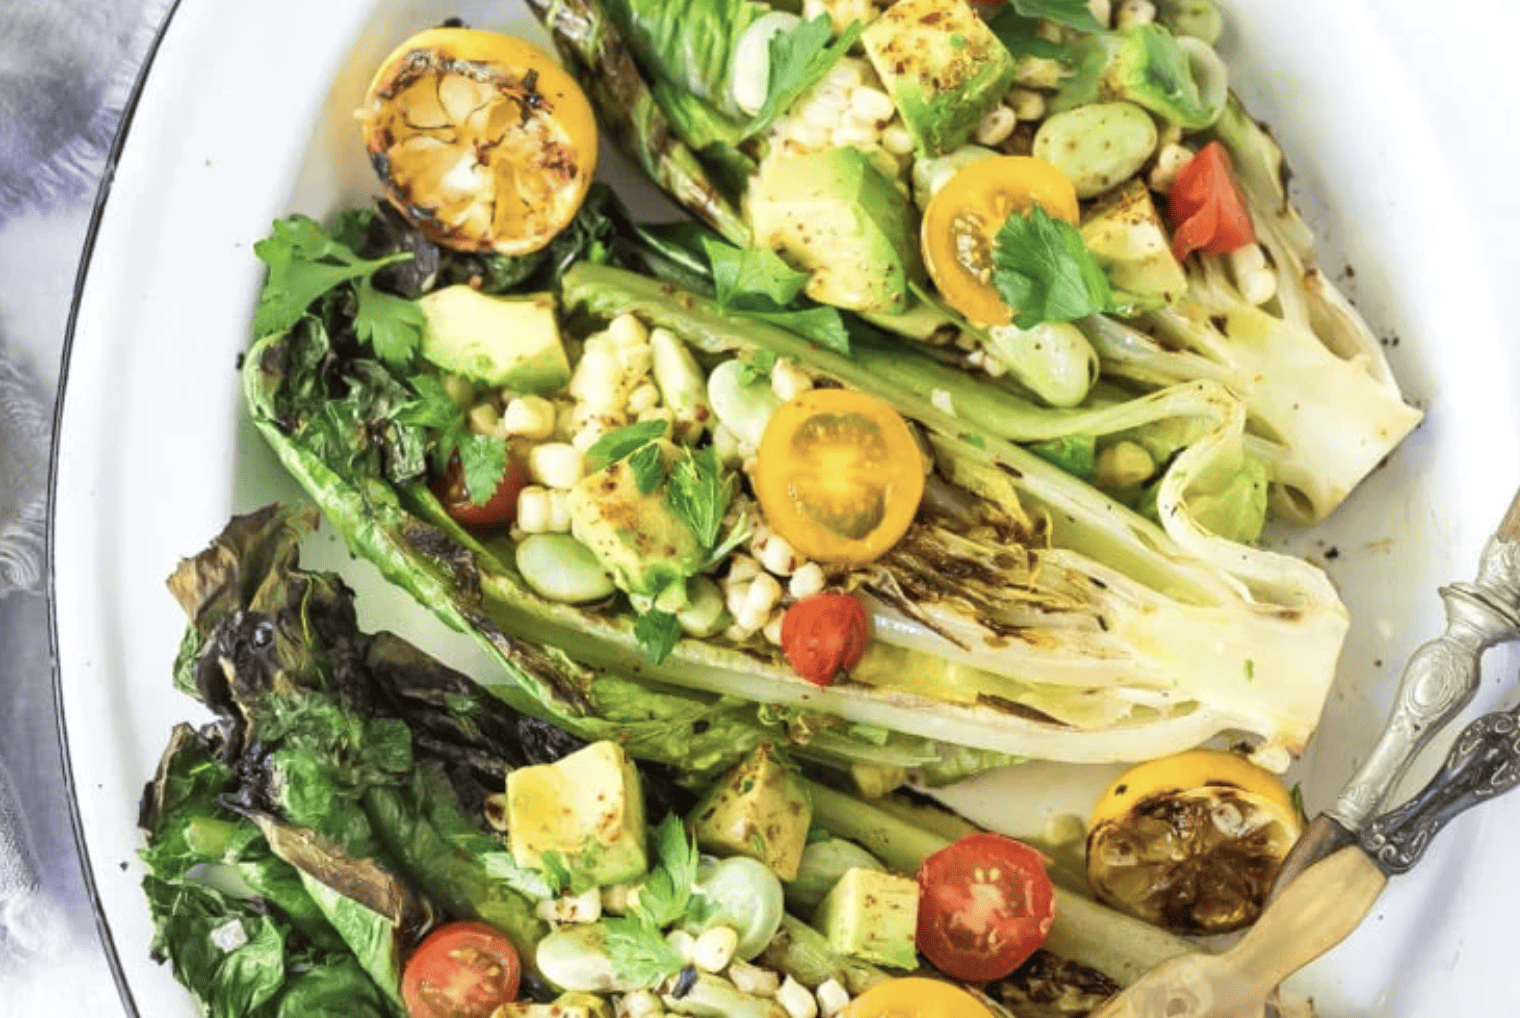 Grilled Romaine Salad with Corn, Fava Beans, and Avocado